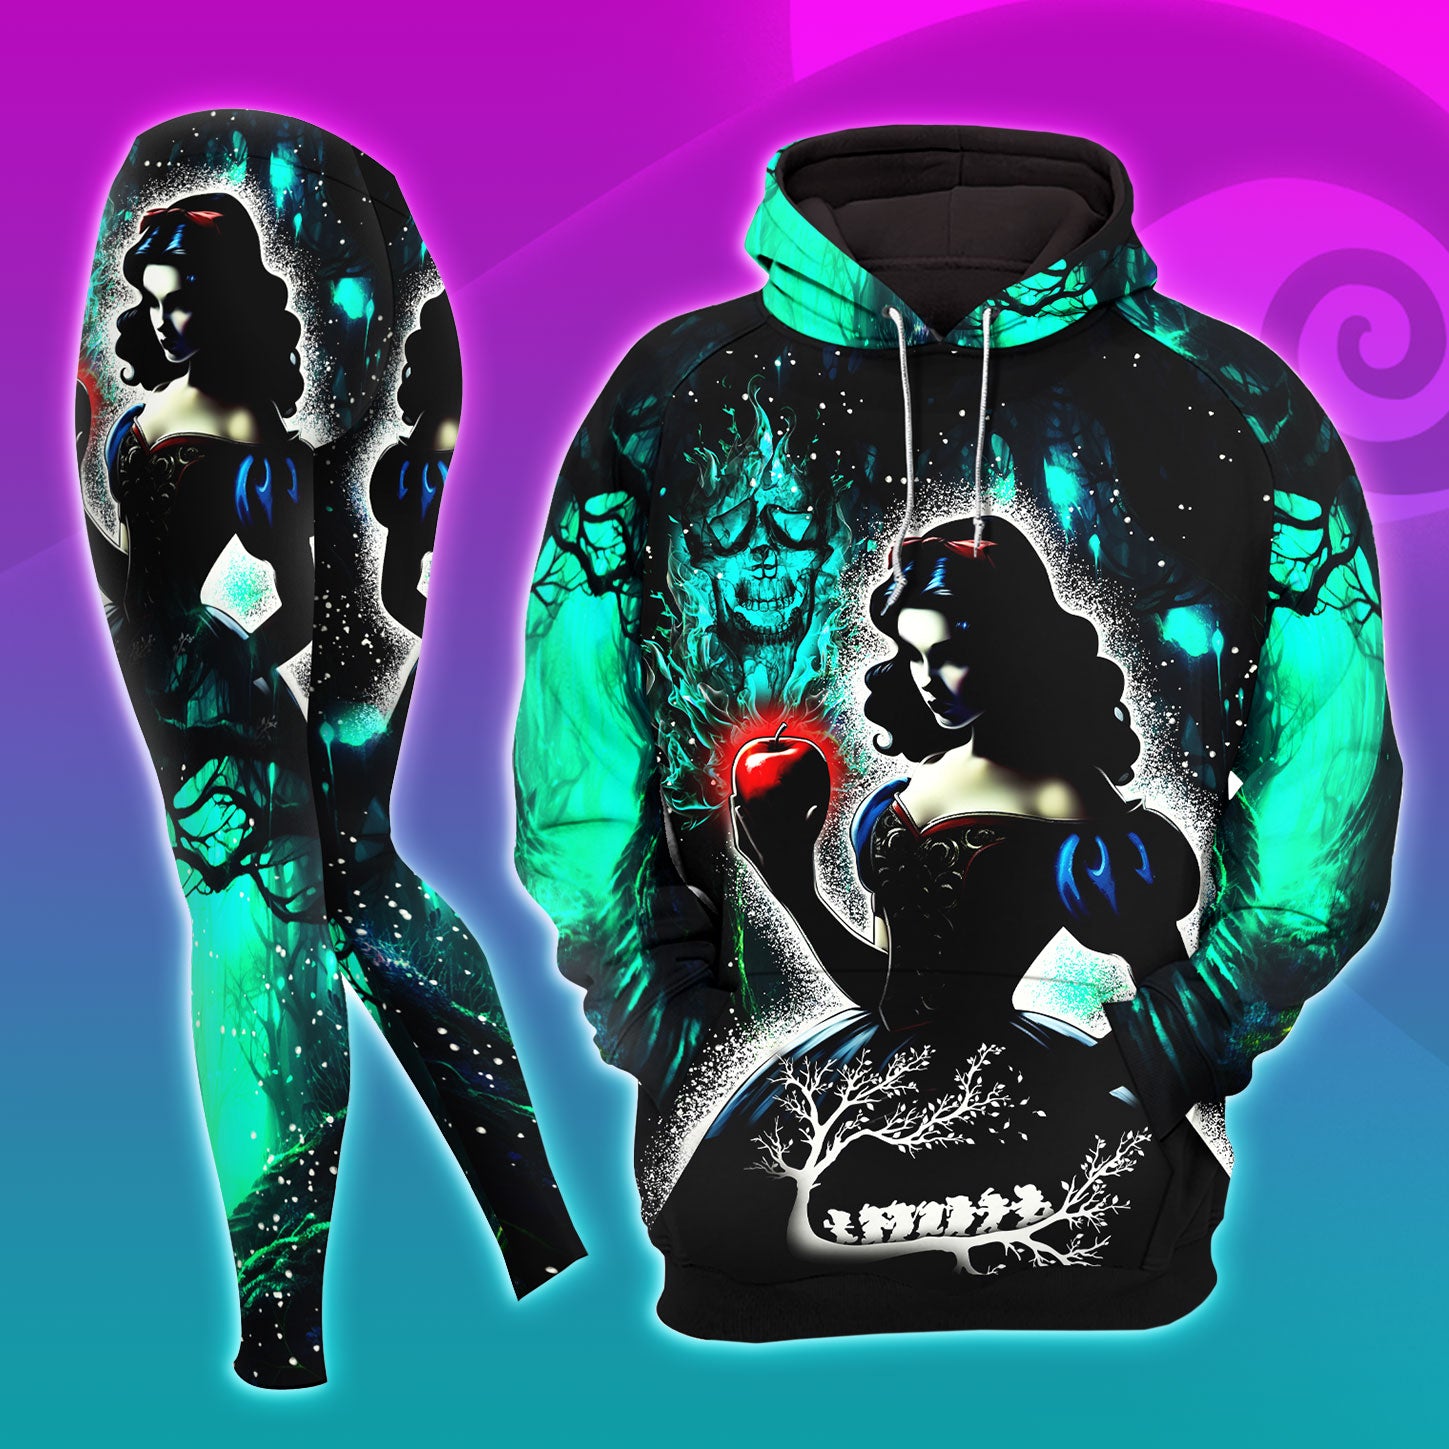 Dark Green Theme Combo Hoodie and Leggings - Dark and edgy matching set with skull designs for a unique and stylish look.